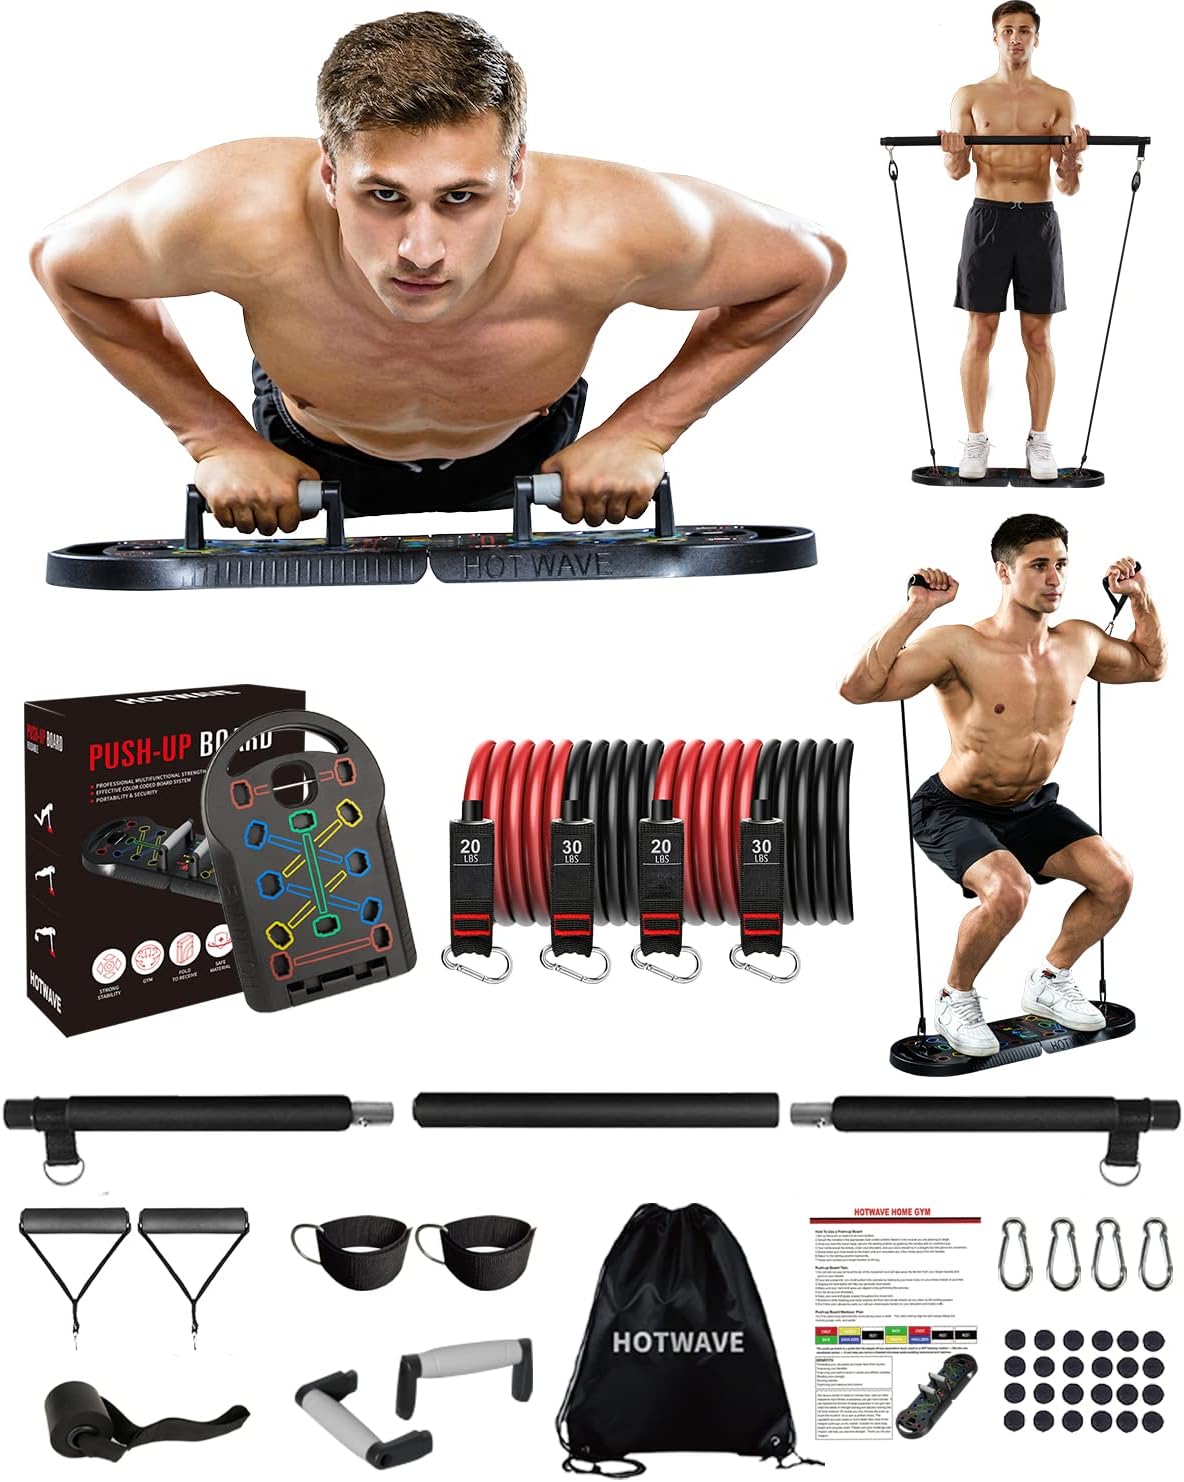 HOTWAVE Push Up Board Fitness Review